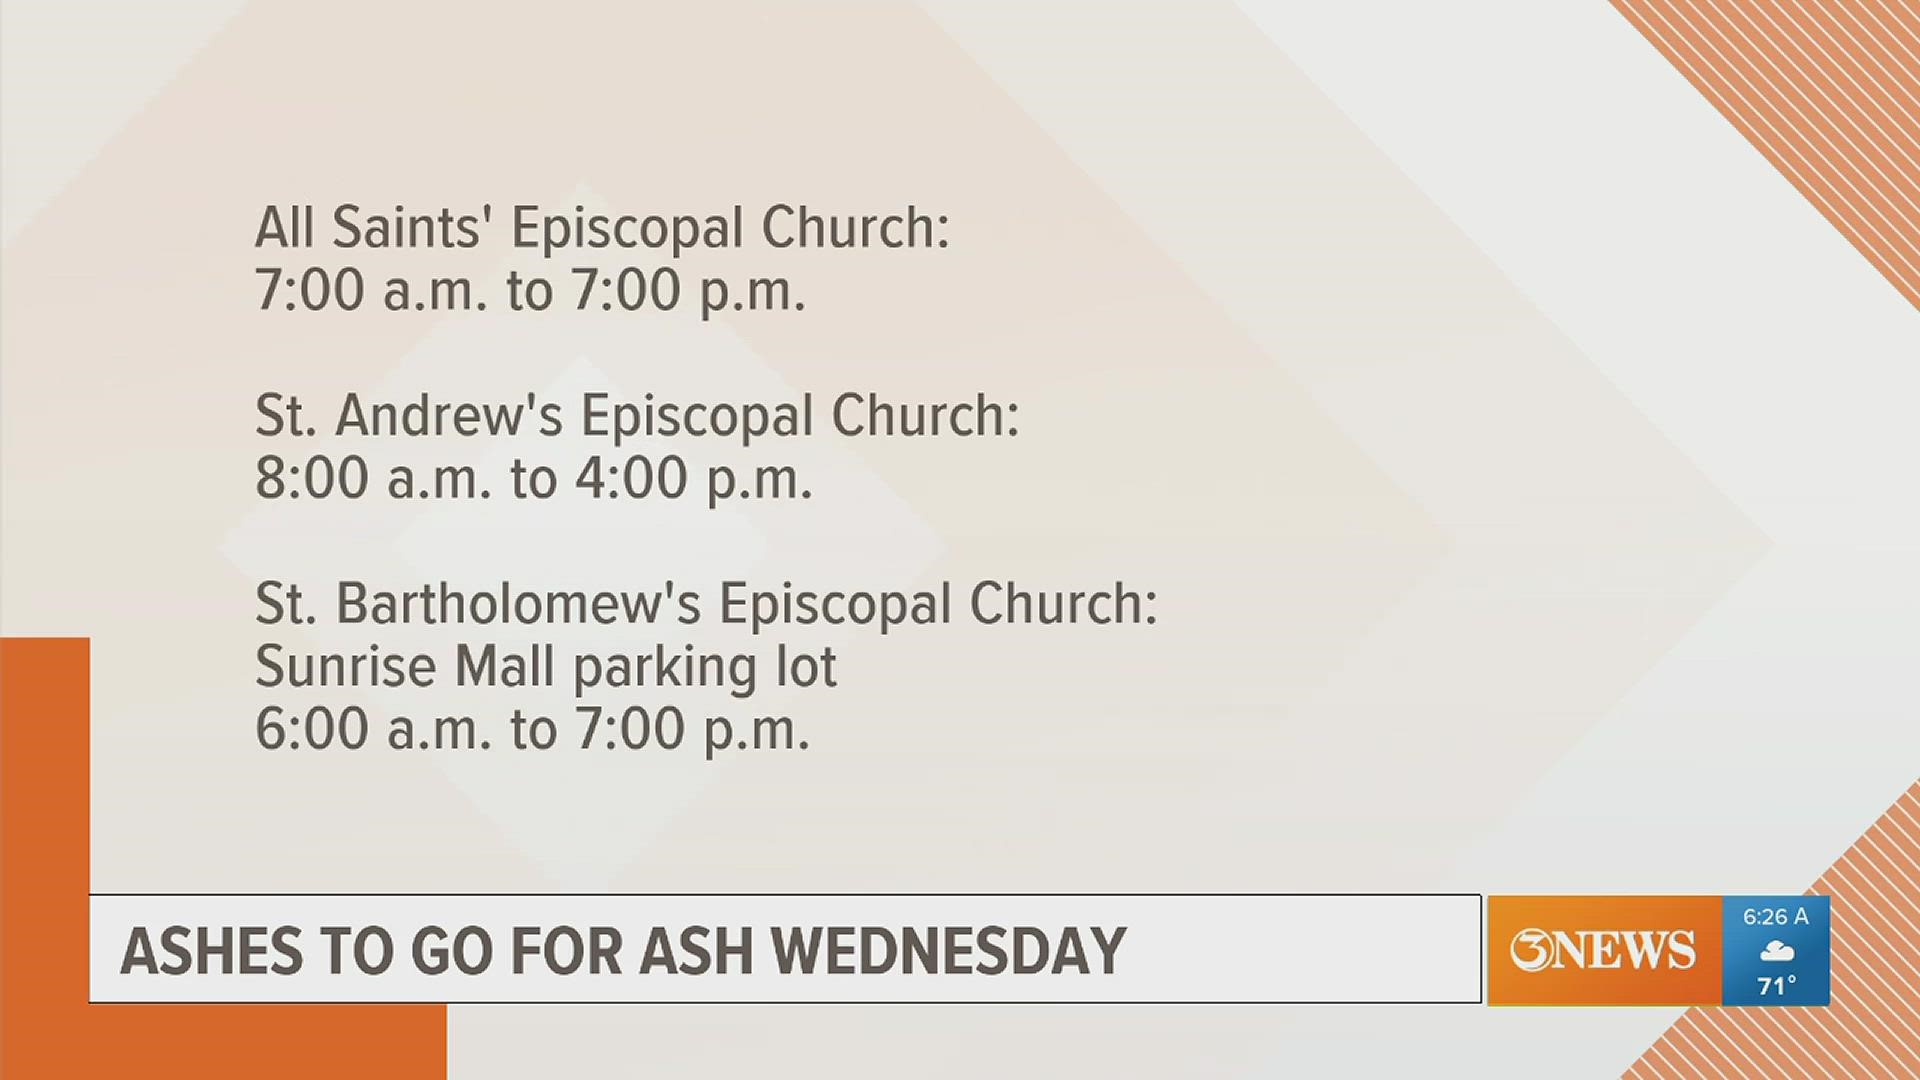 Several churches will be offering "ashes to go," which allows worshippers to remain in their car while receiving their ashes.